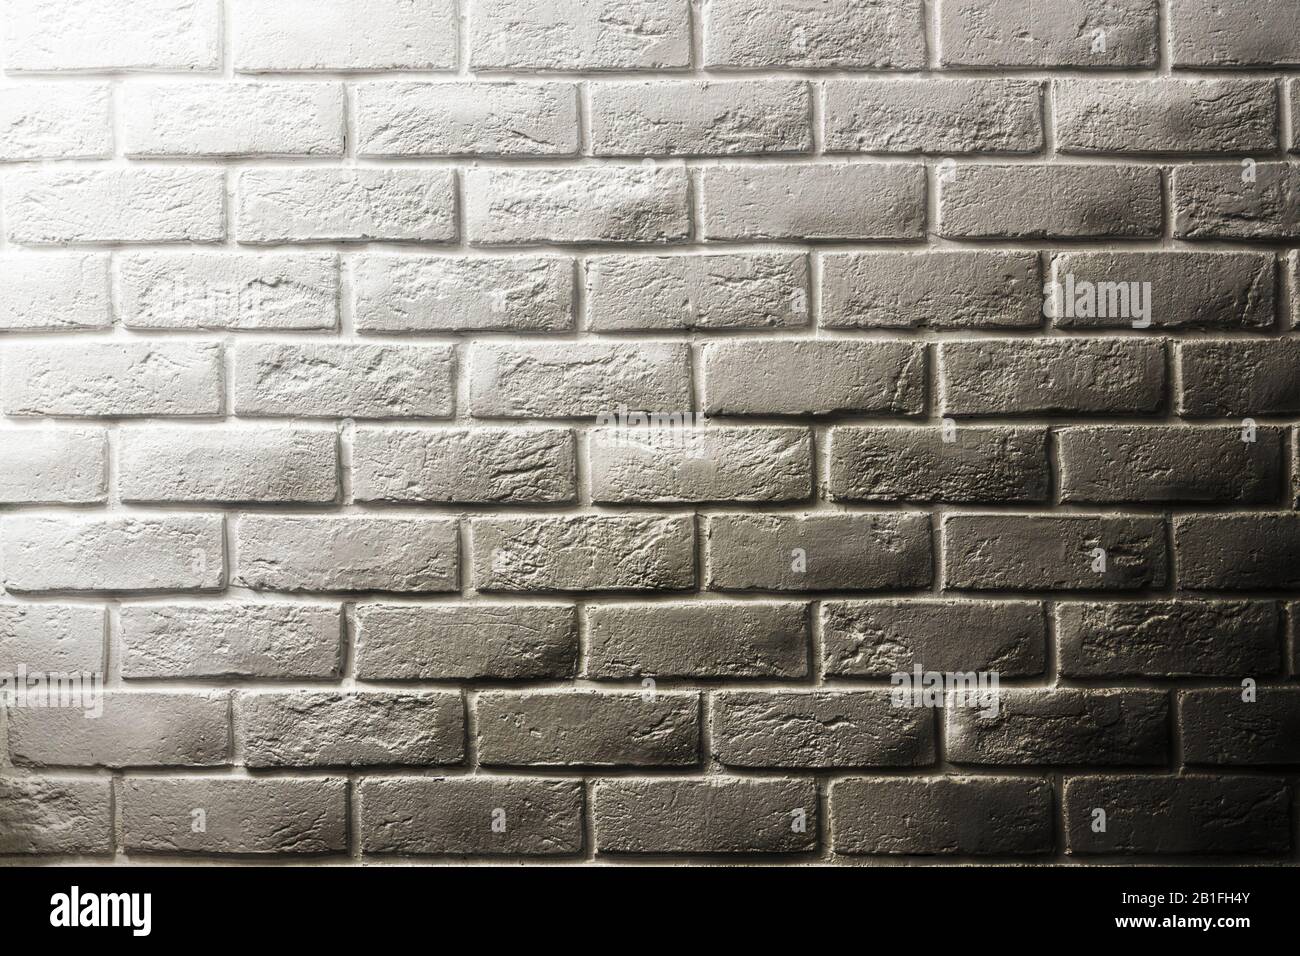 White Brick Wall Shadow And Gradients Volume From White To Gray Texture Background For Design And Layouts Stock Photo Alamy